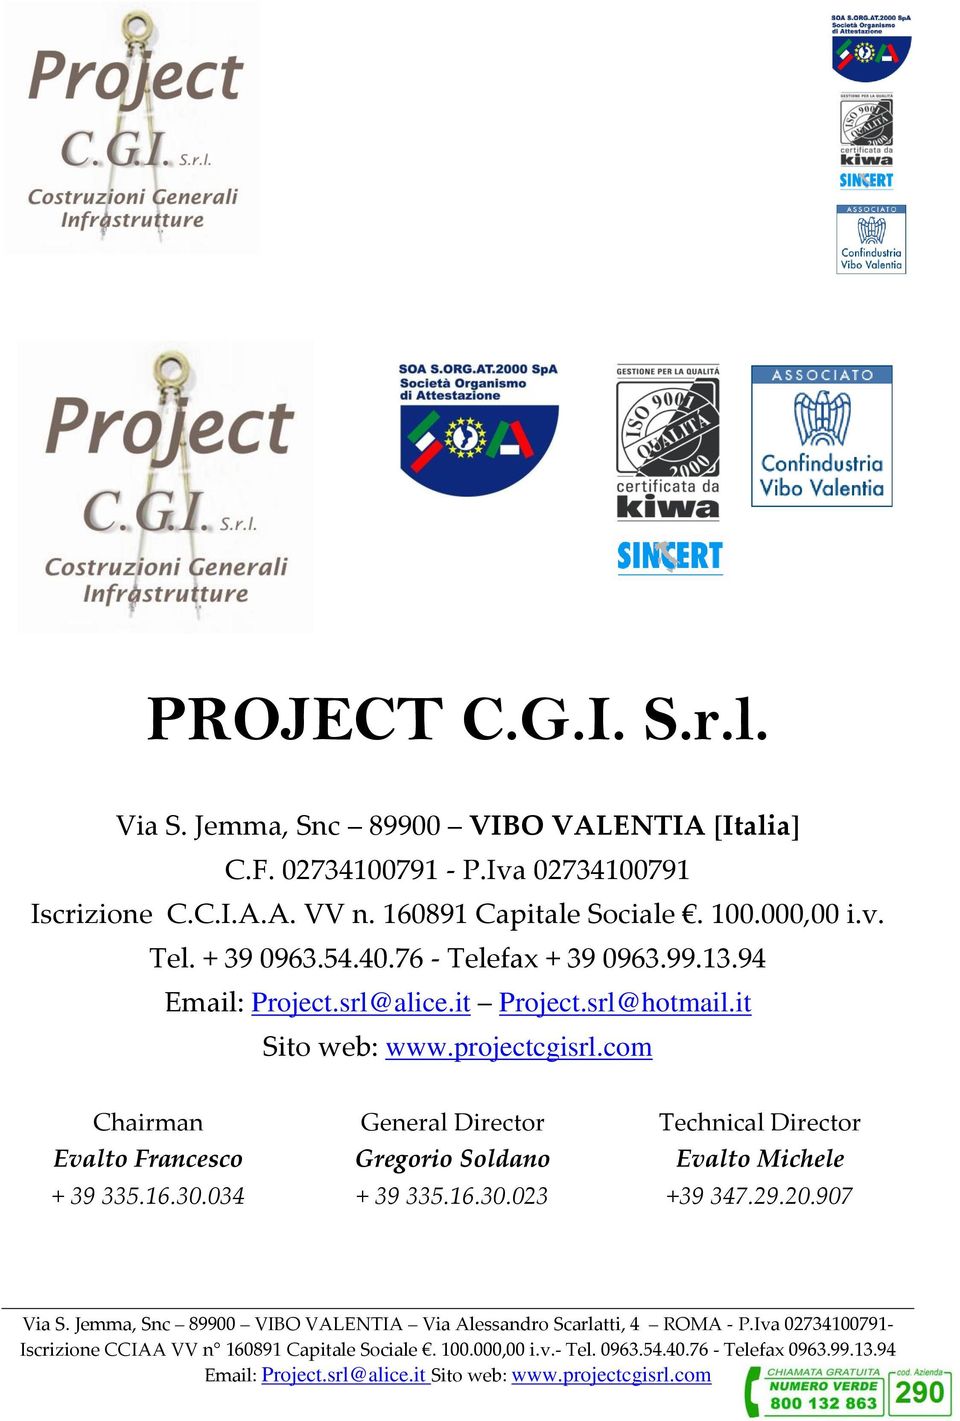 76 - Telefax + 39 0963.99.13.94 Email: Project.srl@alice.it Project.srl@hotmail.it Sito web: www.projectcgisrl.